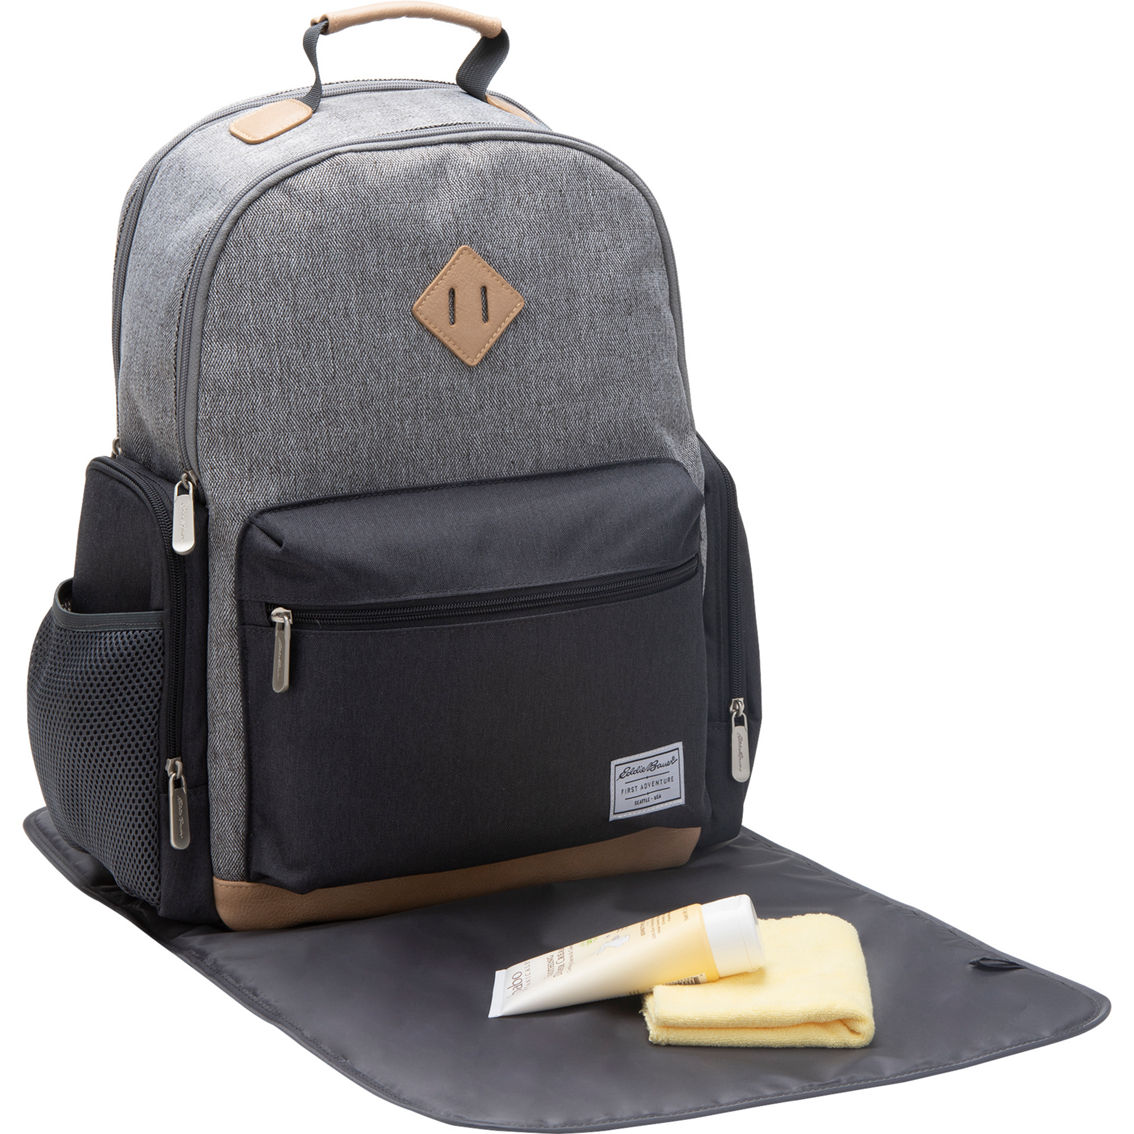 Eddie Bauer Places and Spaces Bridgeport Backpack Diaper Bag - Image 3 of 6